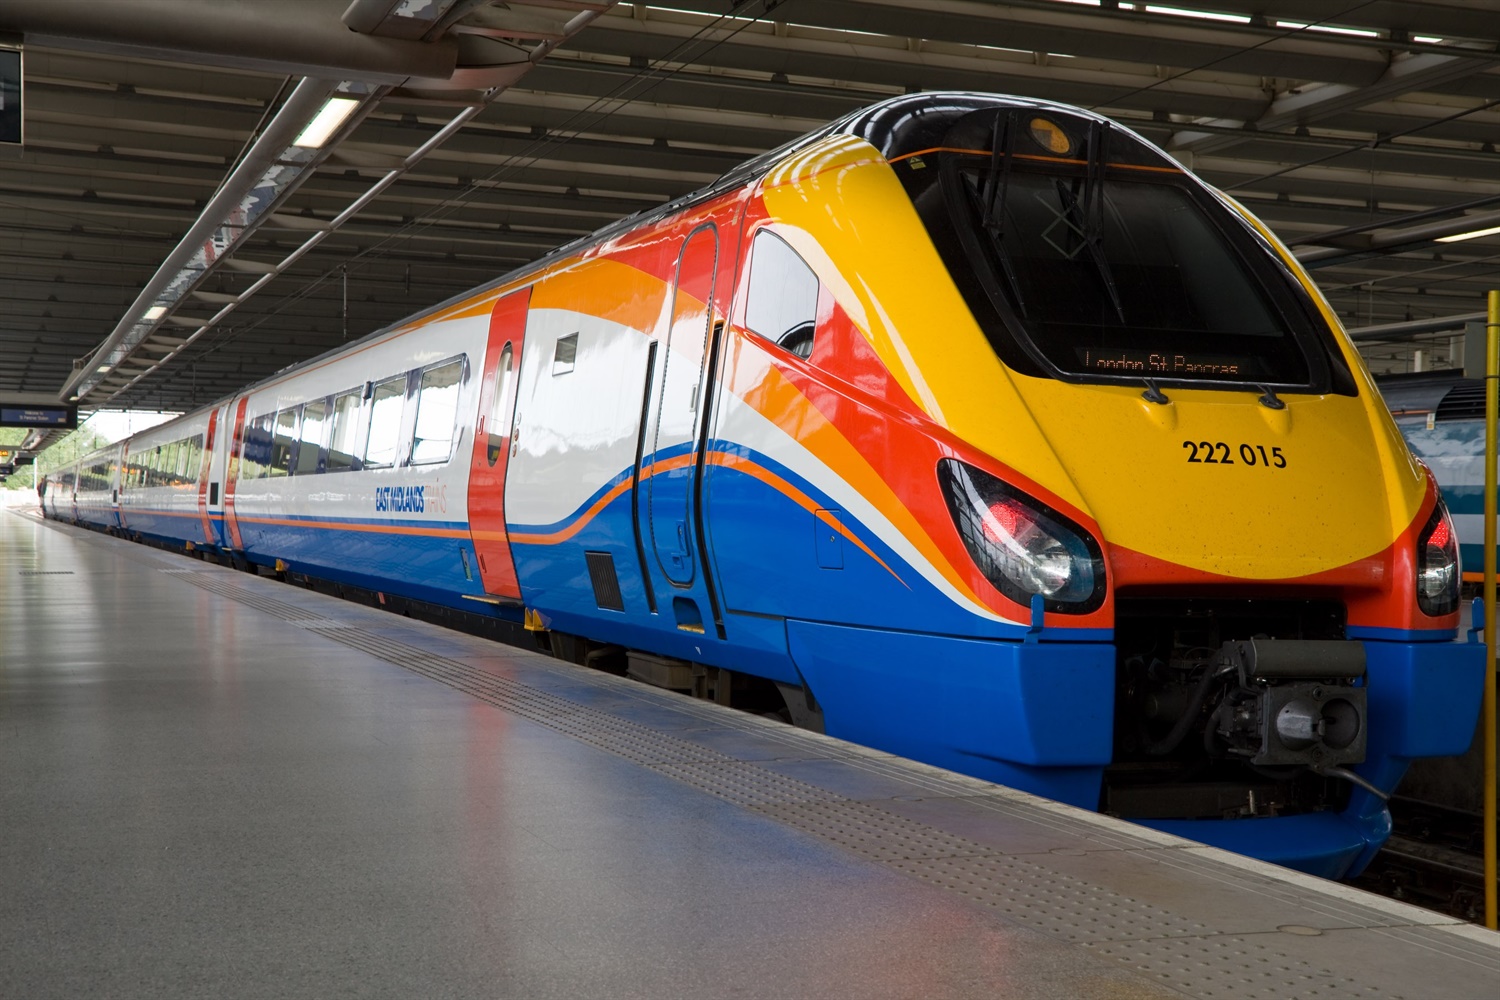 Stagecoach took £35m from rail franchise before abandoning East Coast Main Line